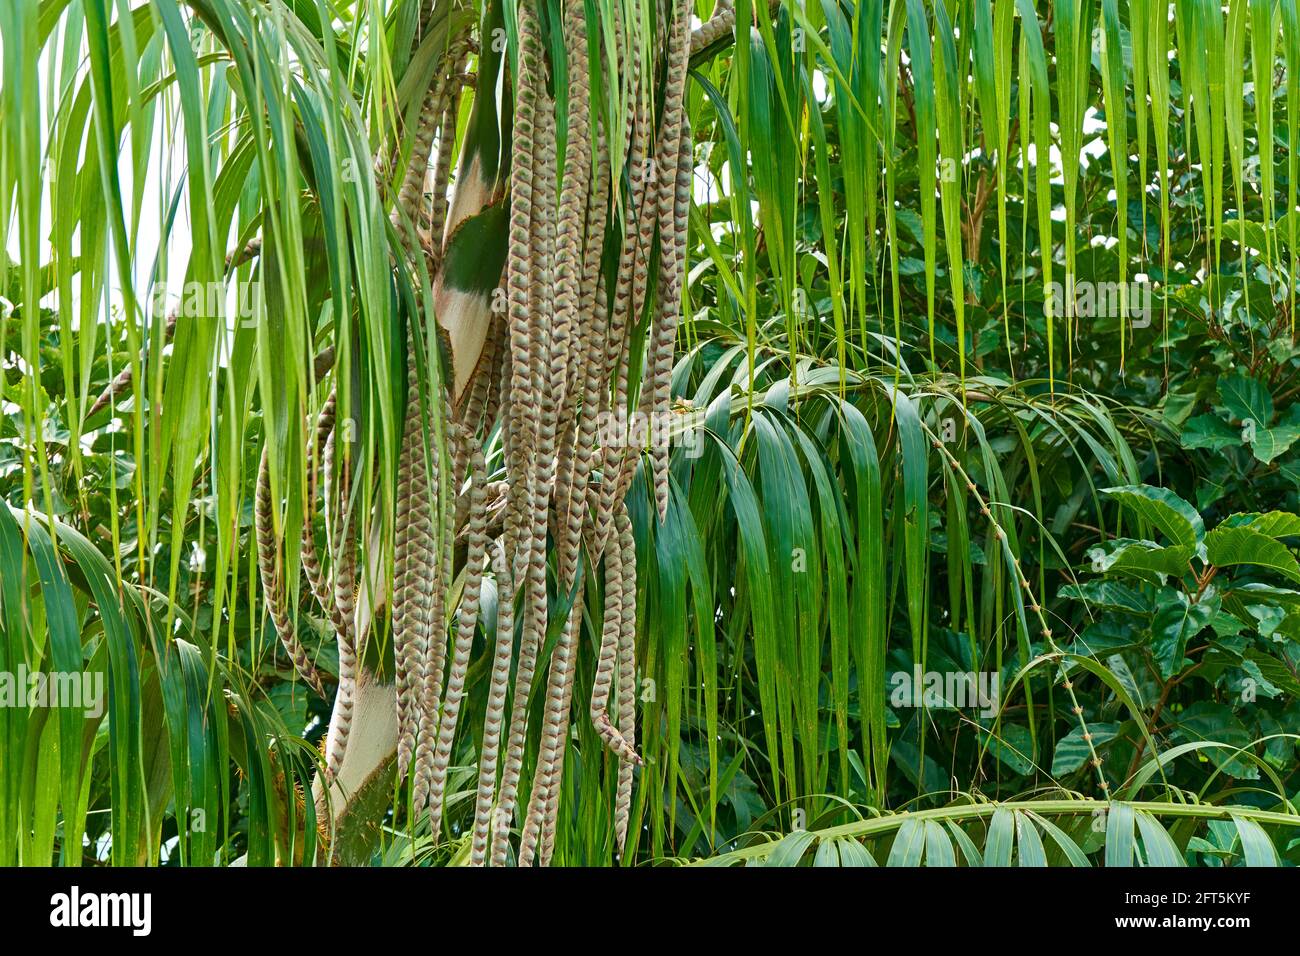 A plant in the tropical jungle. Palm tree with leaves hanging down. Stock Photo